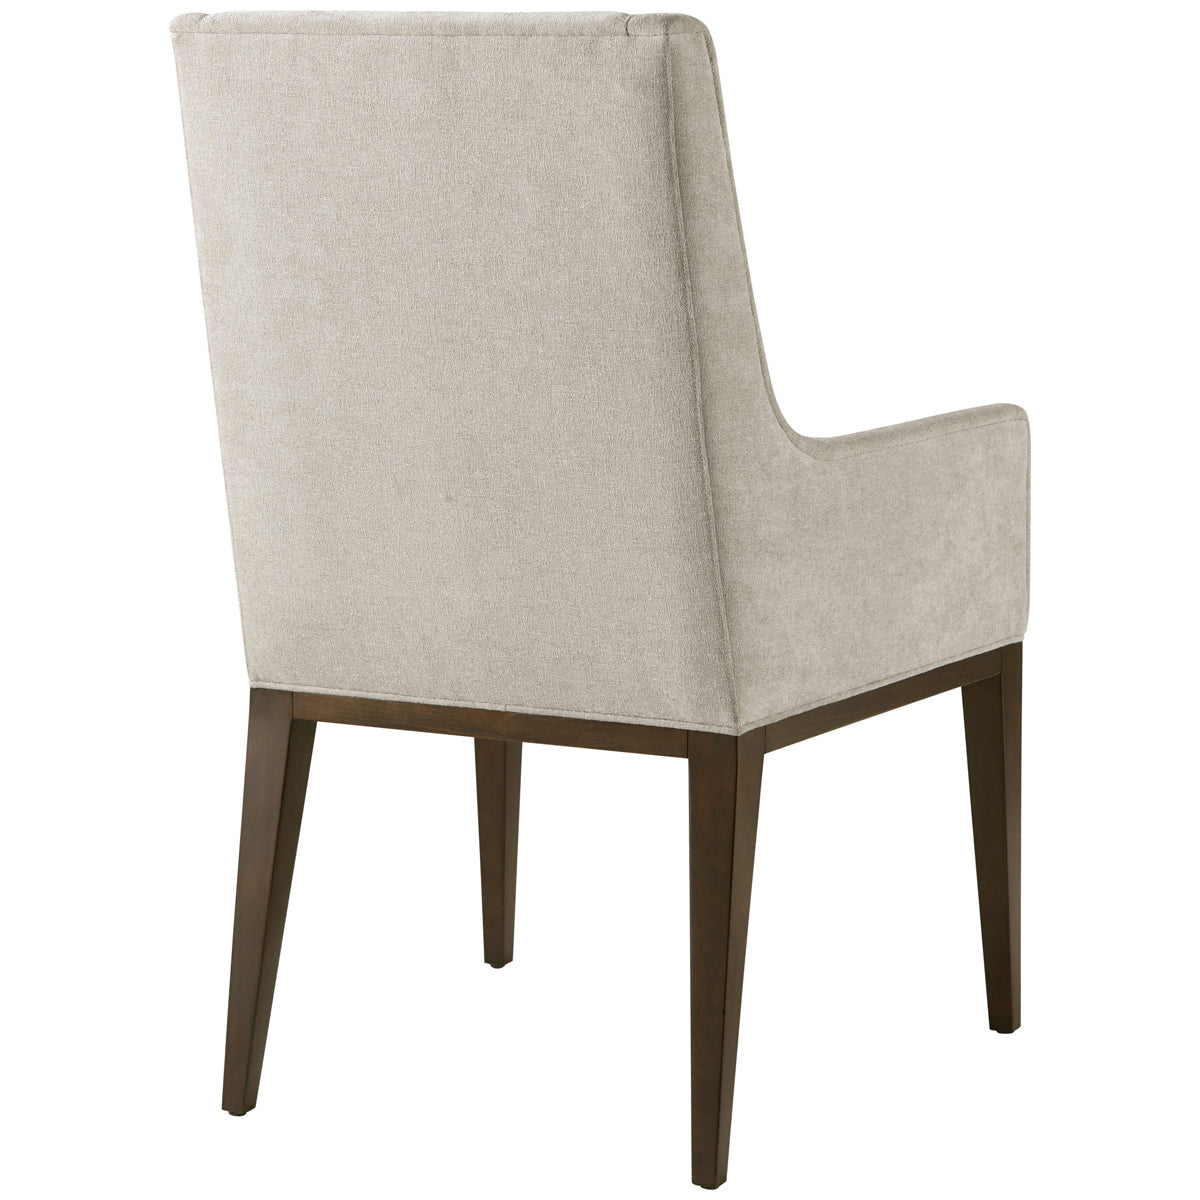 Theodore Alexander Lido Upholstered Dining Arm Chair, Set of 2